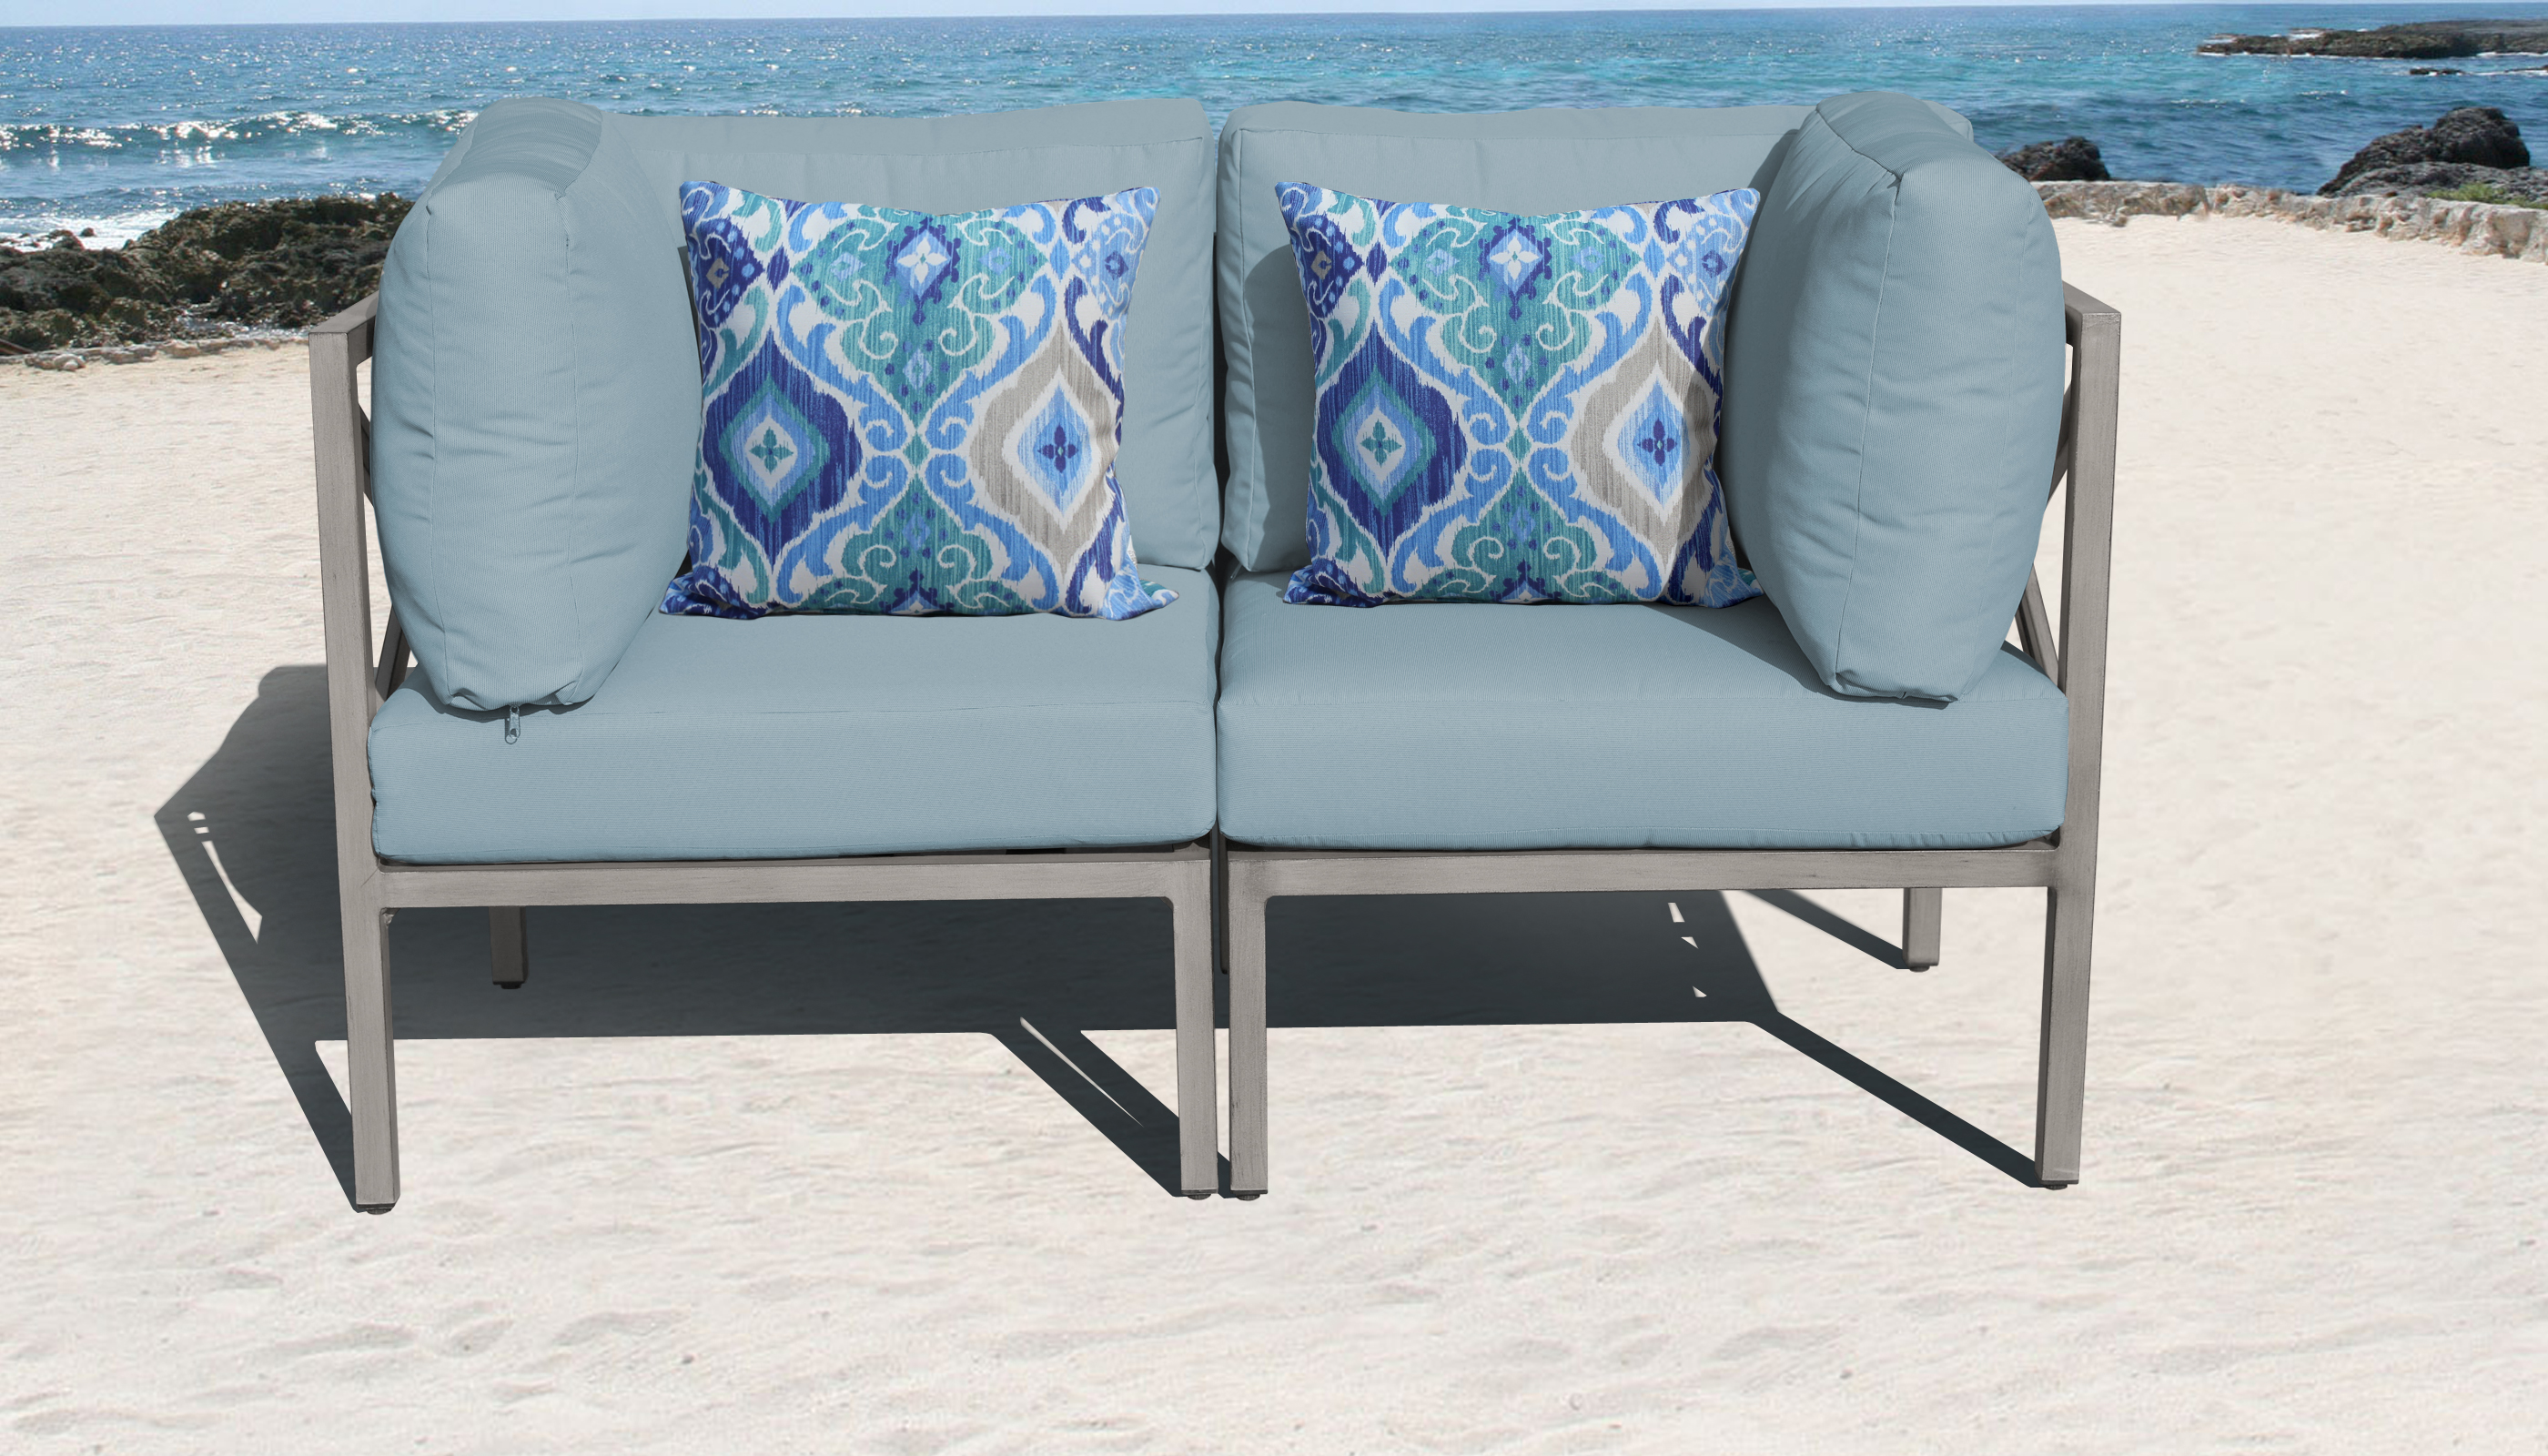 Thick Cushions For Patio Furniture - Patio Ideas